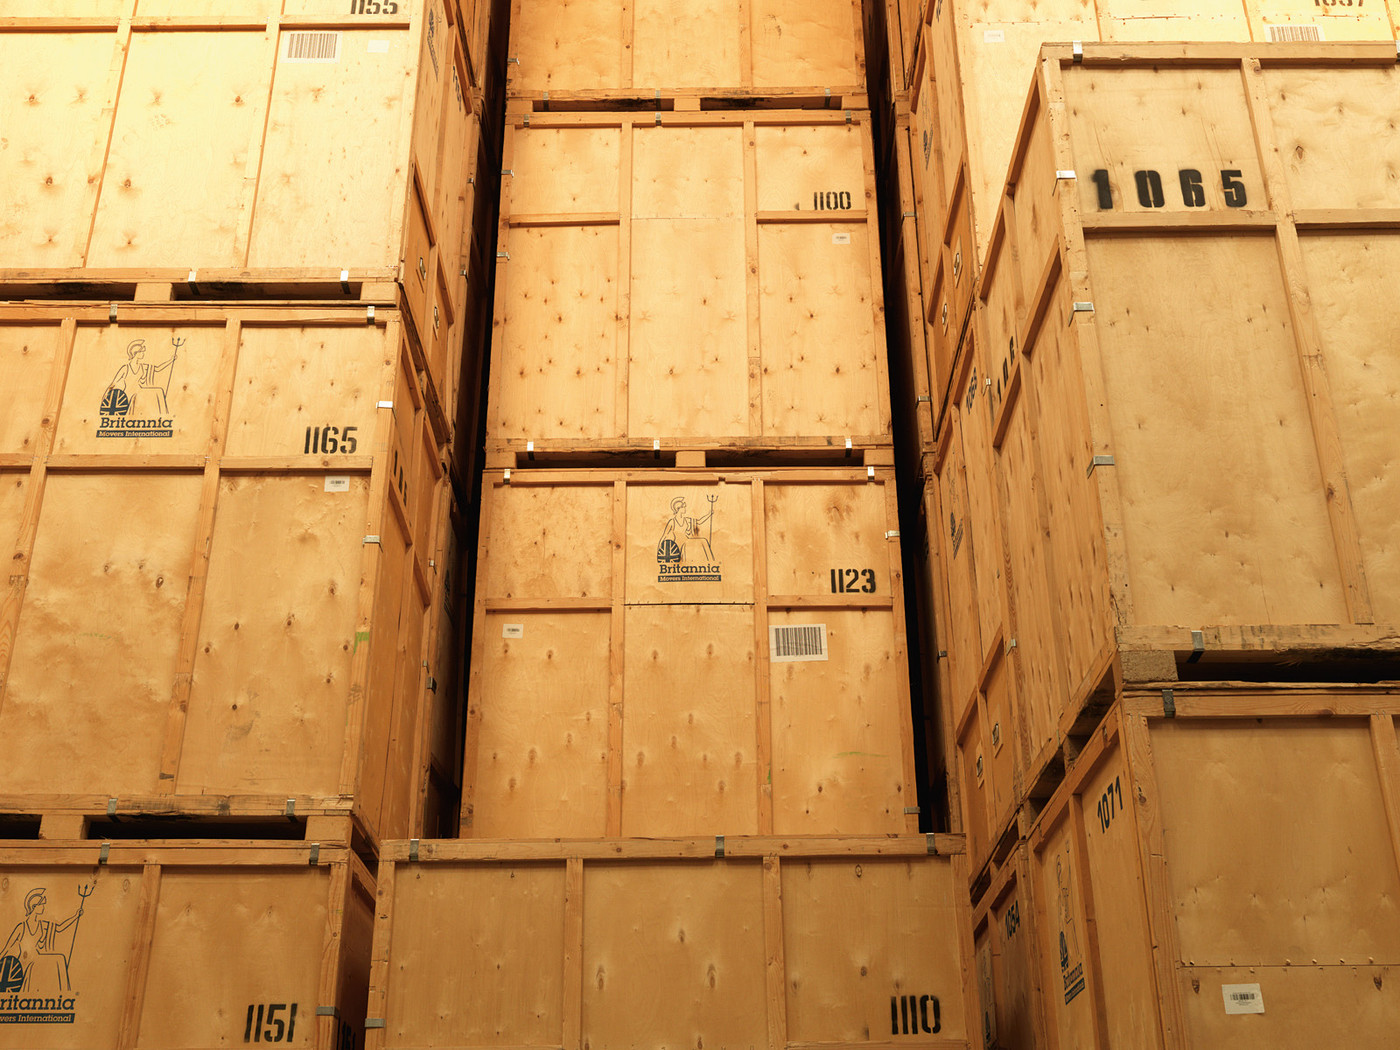 BMI Warehouse containers